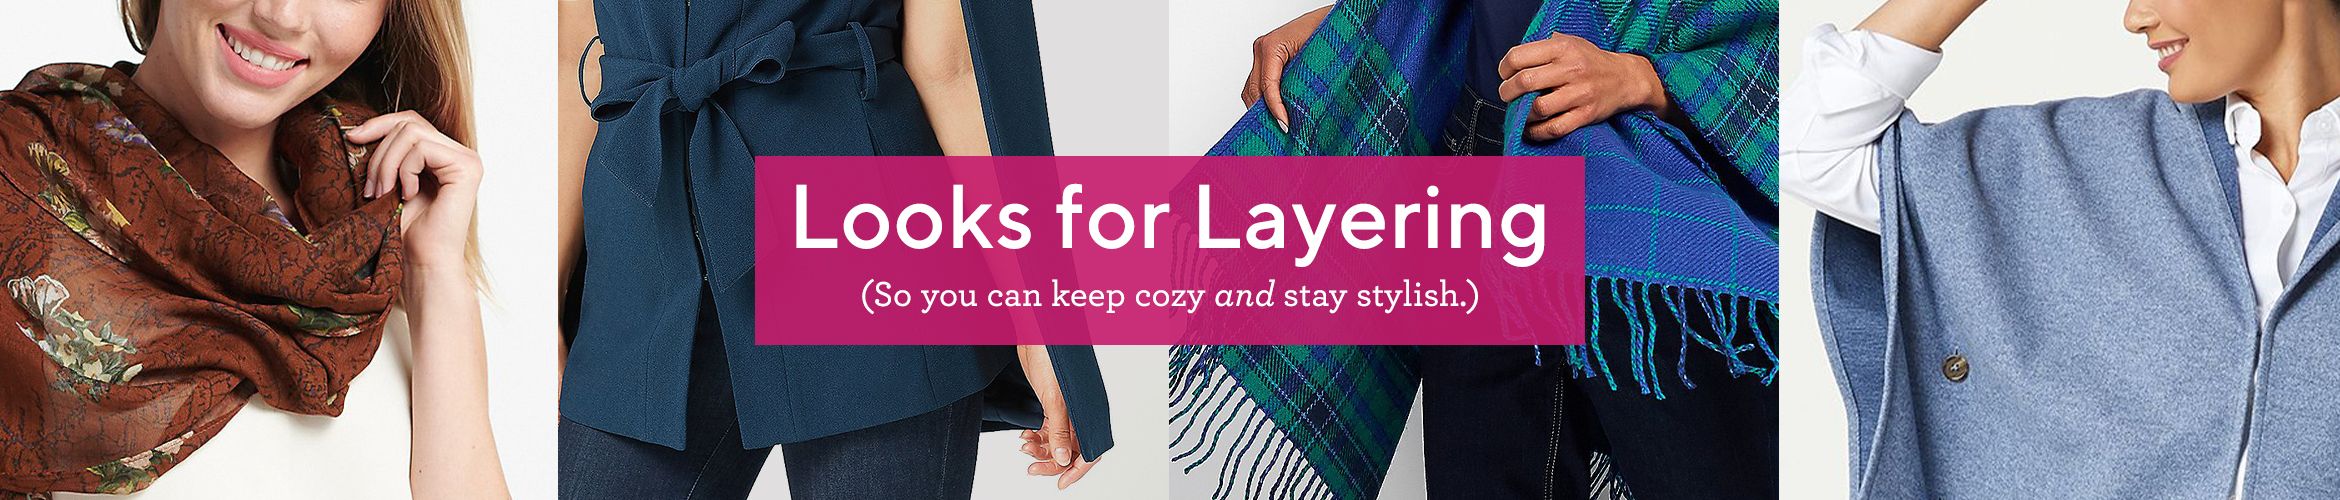 Looks for Layering.  (So you can keep cozy and stay stylish.)